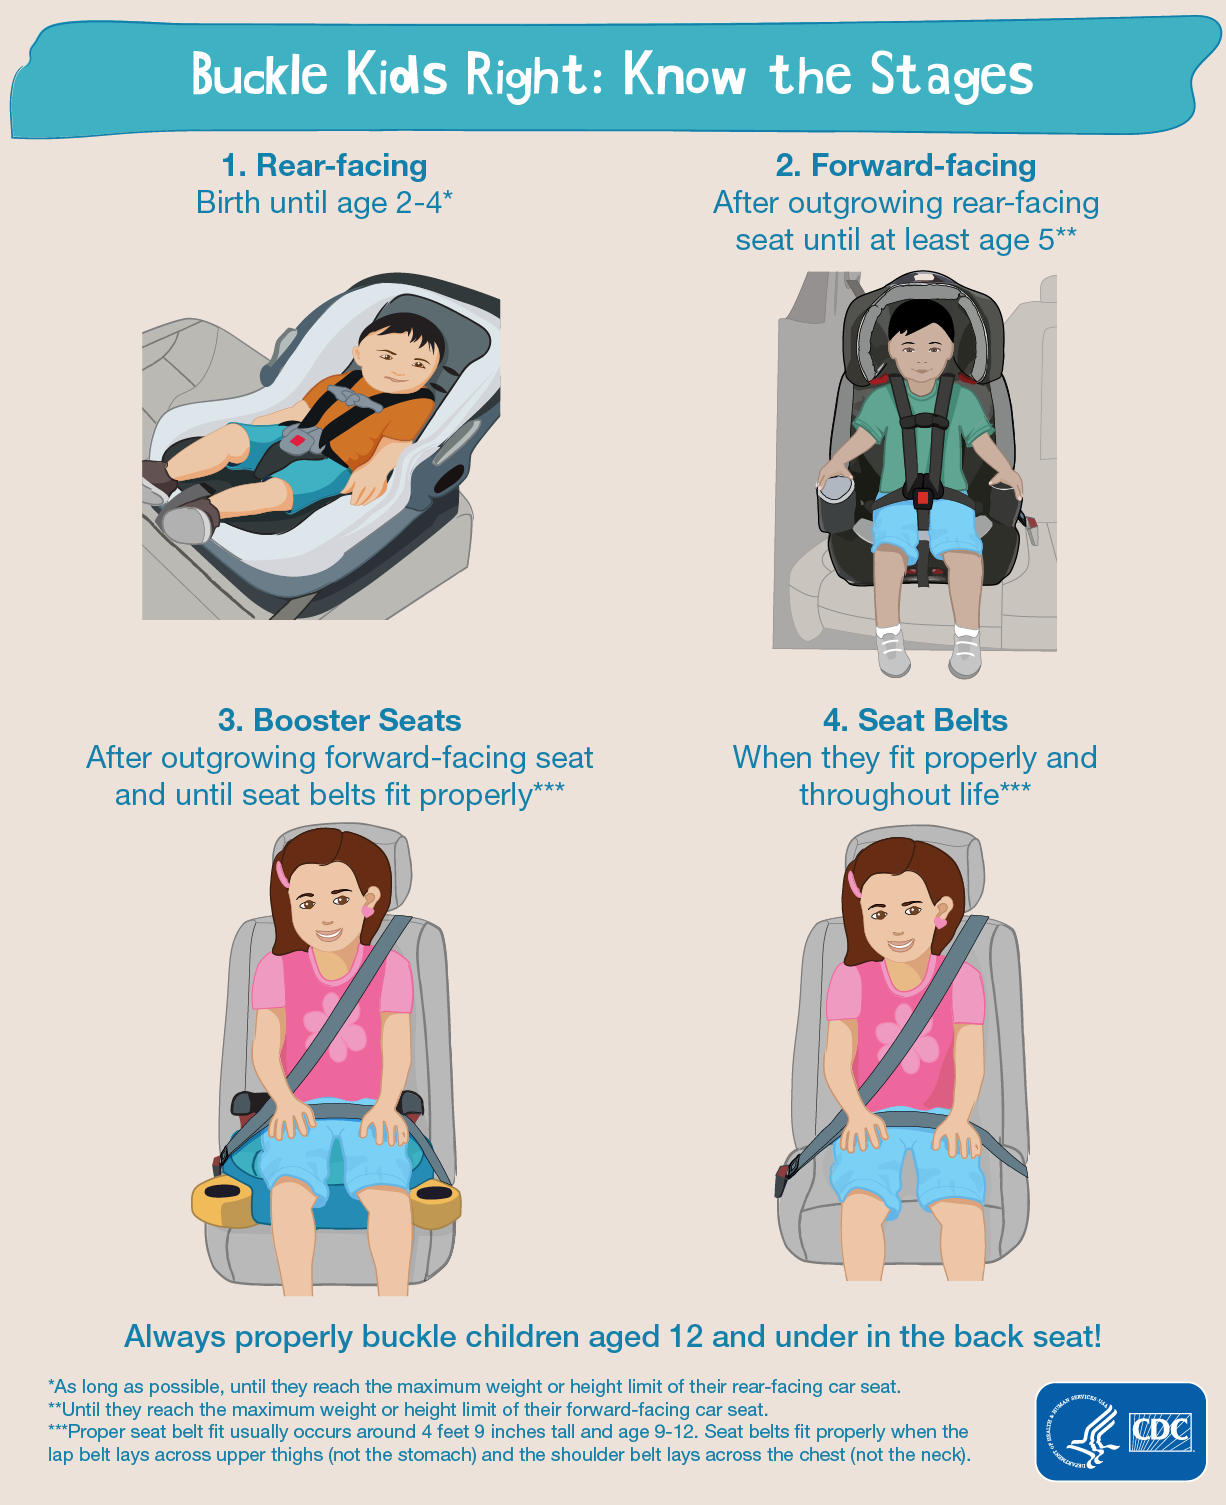 Buckle kids right : know the stages